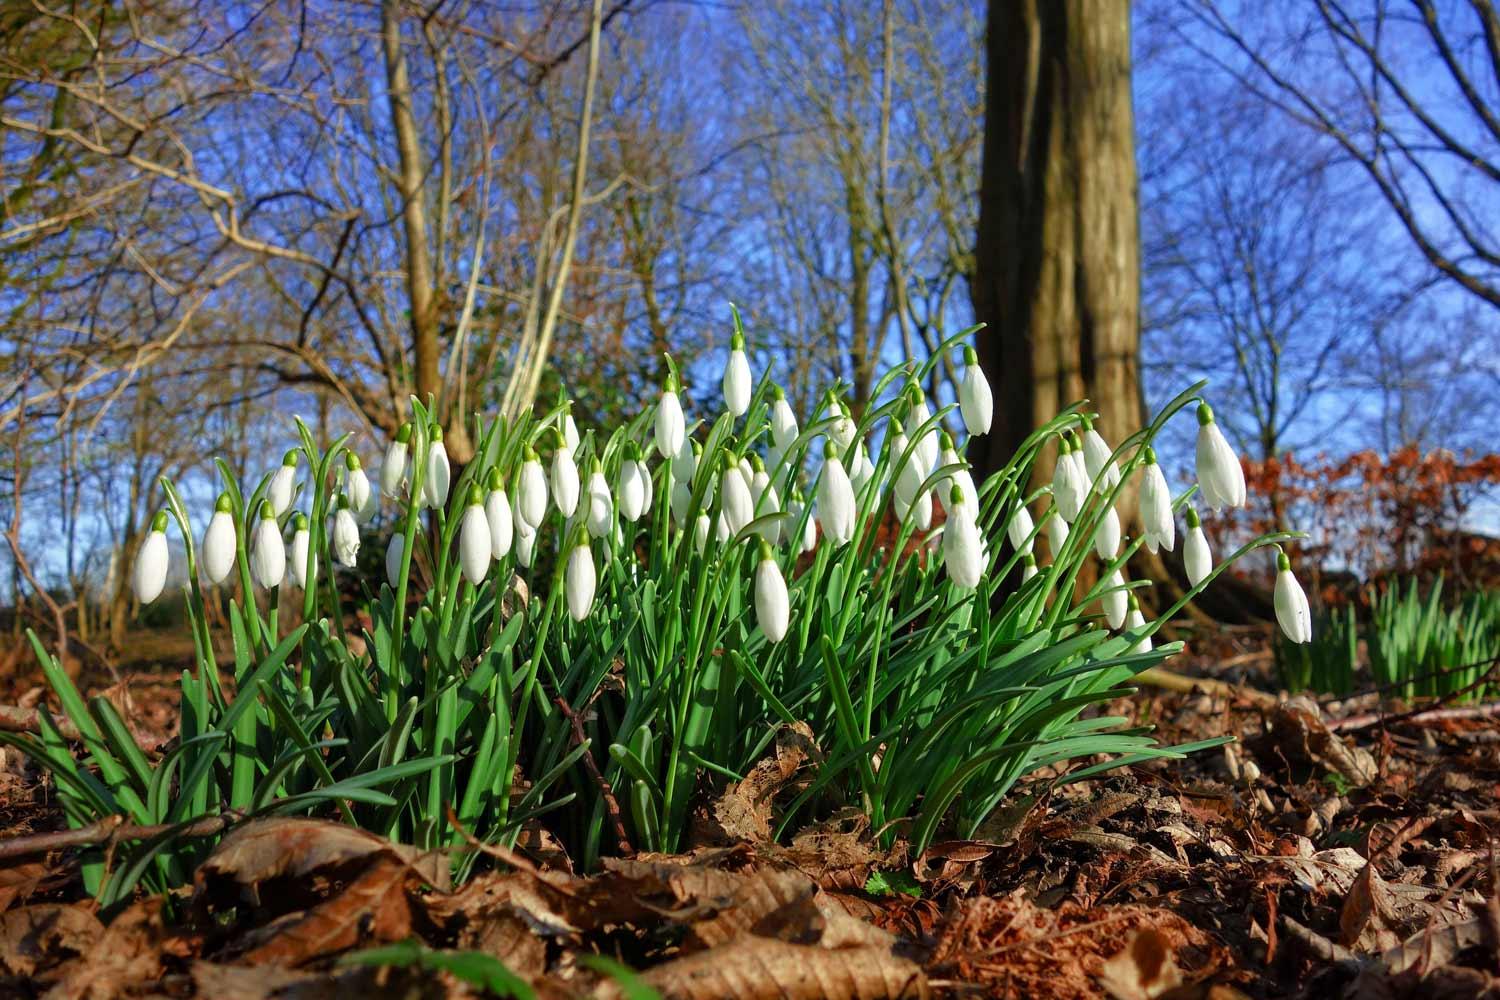 Snow Drops blooming in early spring